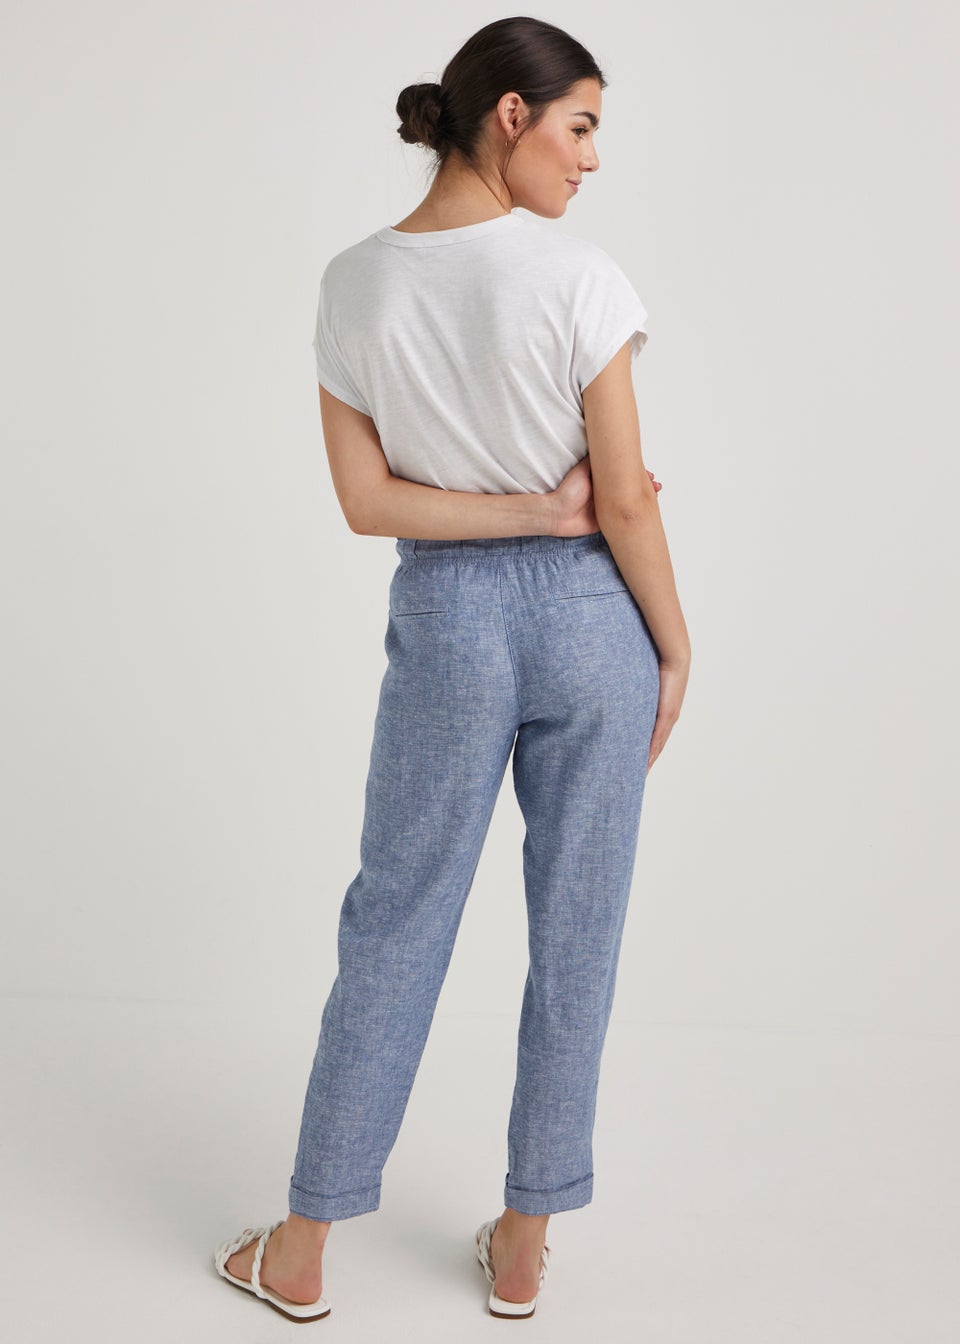 Buy Women Pant Gray Solid Cotton Chambray for Best Price, Reviews, Free  Shipping